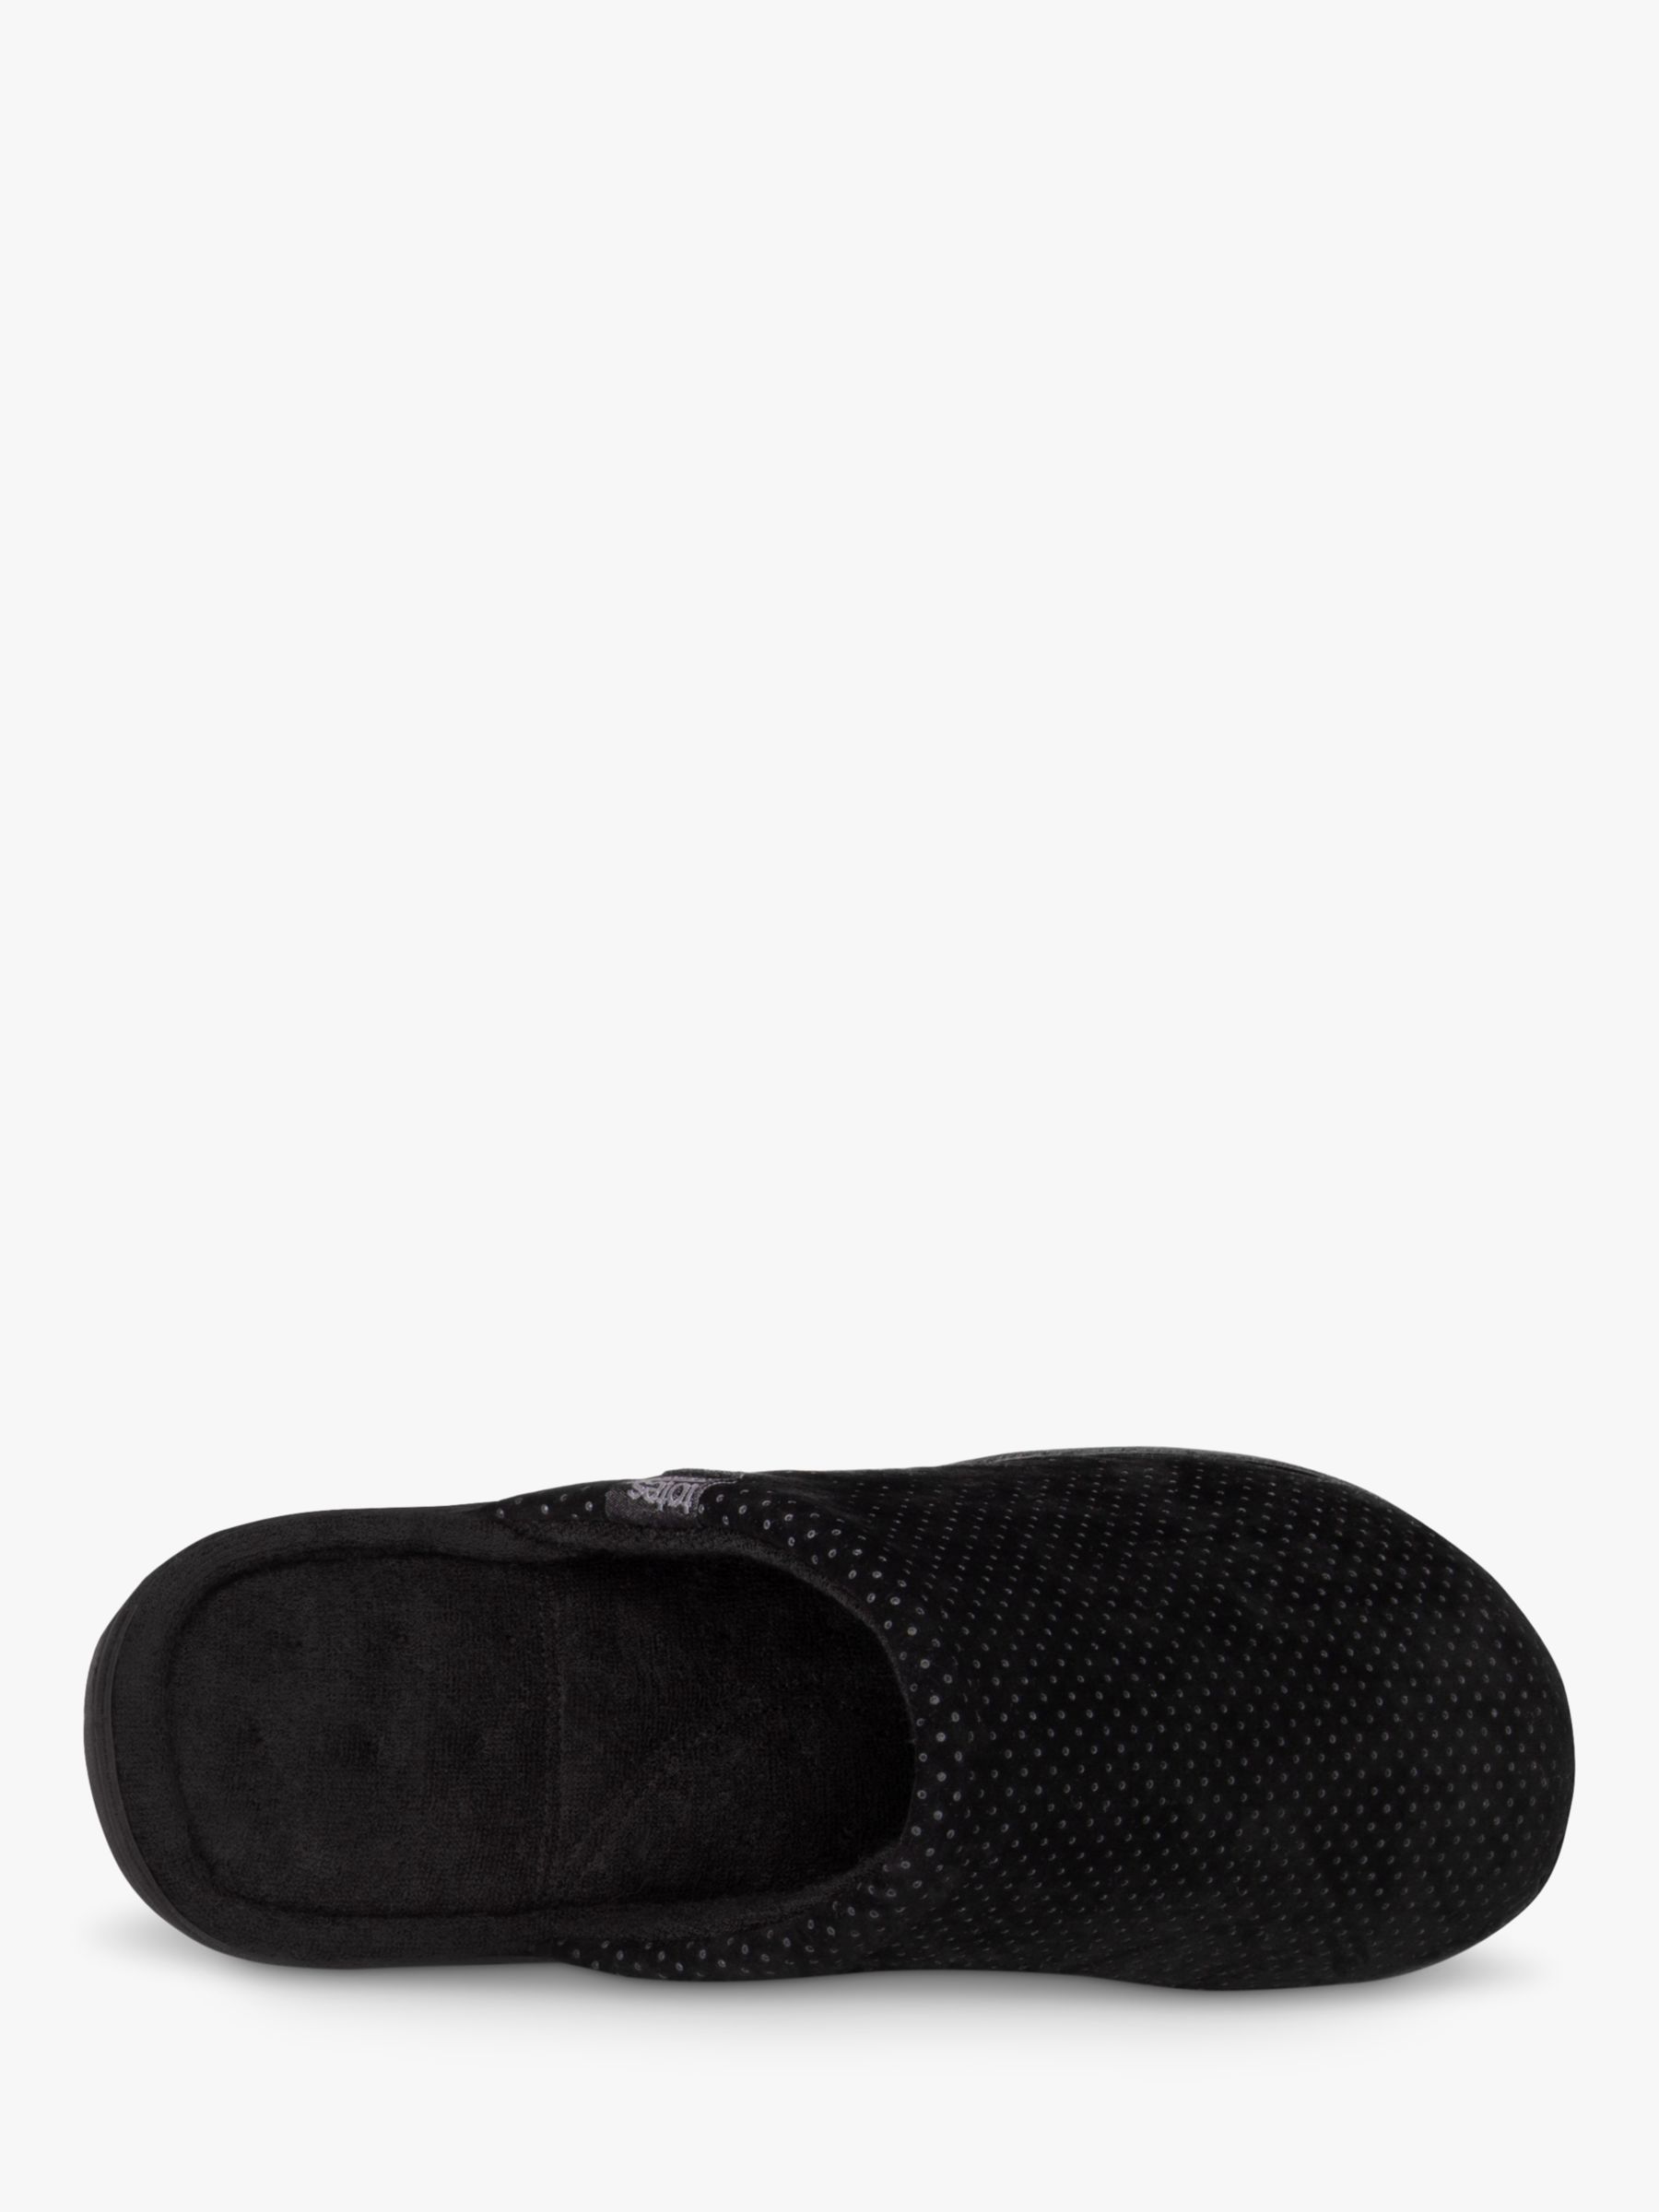 totes Airtex Suedette Mule Slippers, Black, 8